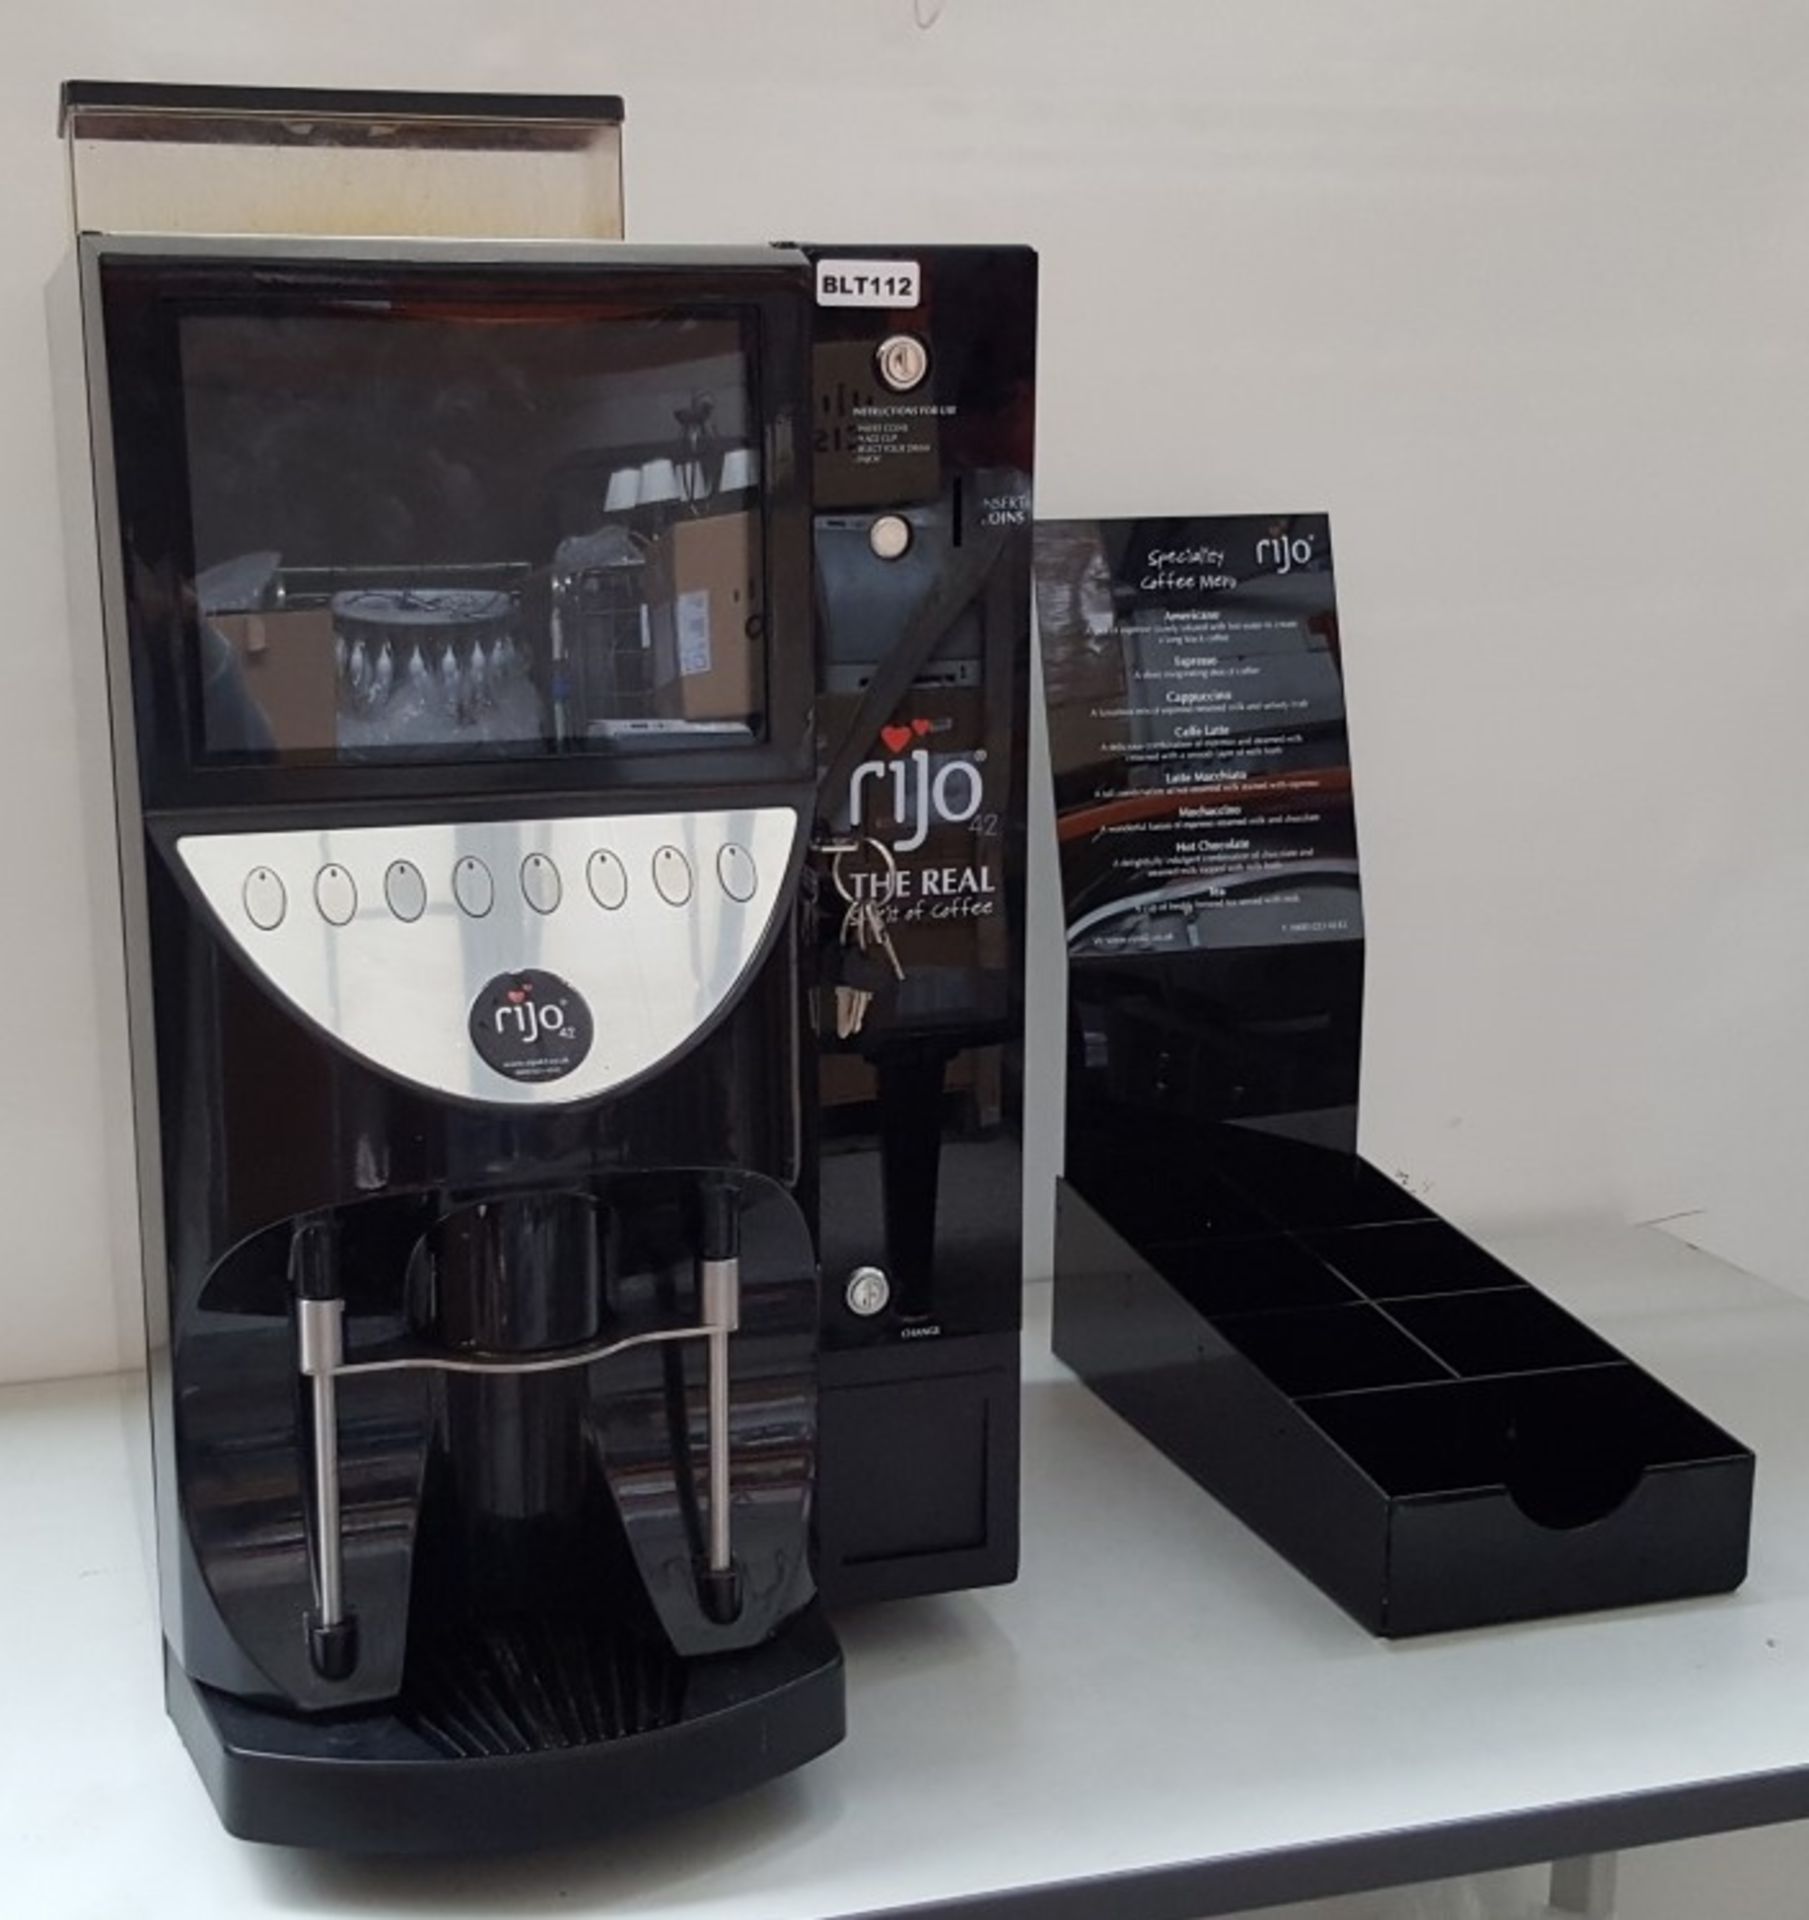 1 x Rijo 42 Brasil RSD Touch Bean to Cup Coffee Machine - Ref BLT112 - Image 8 of 9